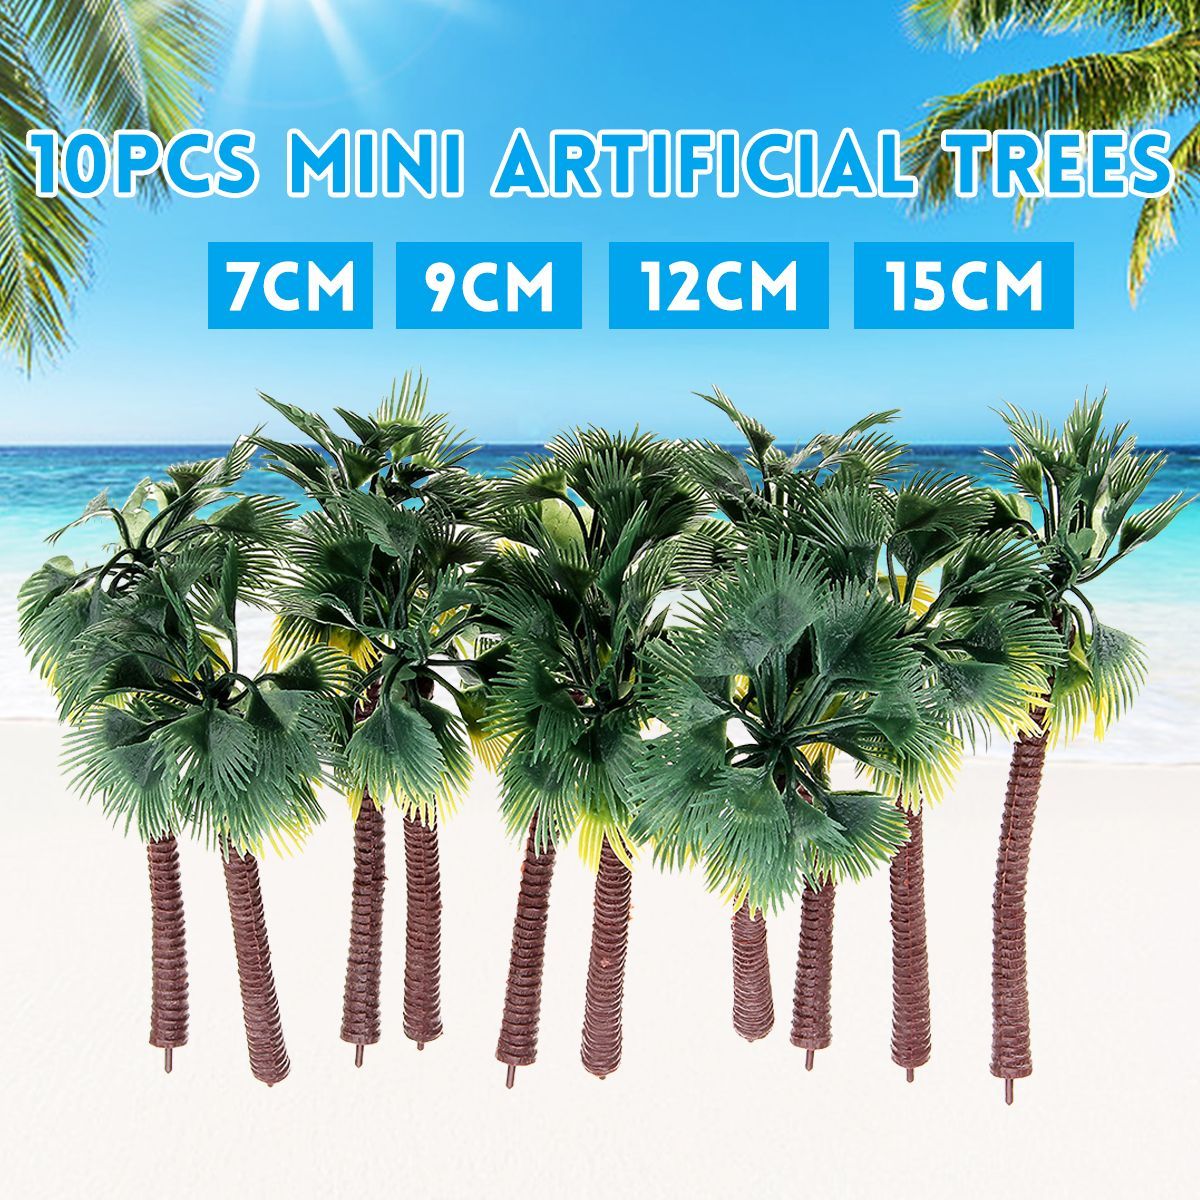 10Pcs-Mini-Artificial-Trees-Yellow-Leaf-Coconut-Tree-Home-Office-Party-Decorations-1649247